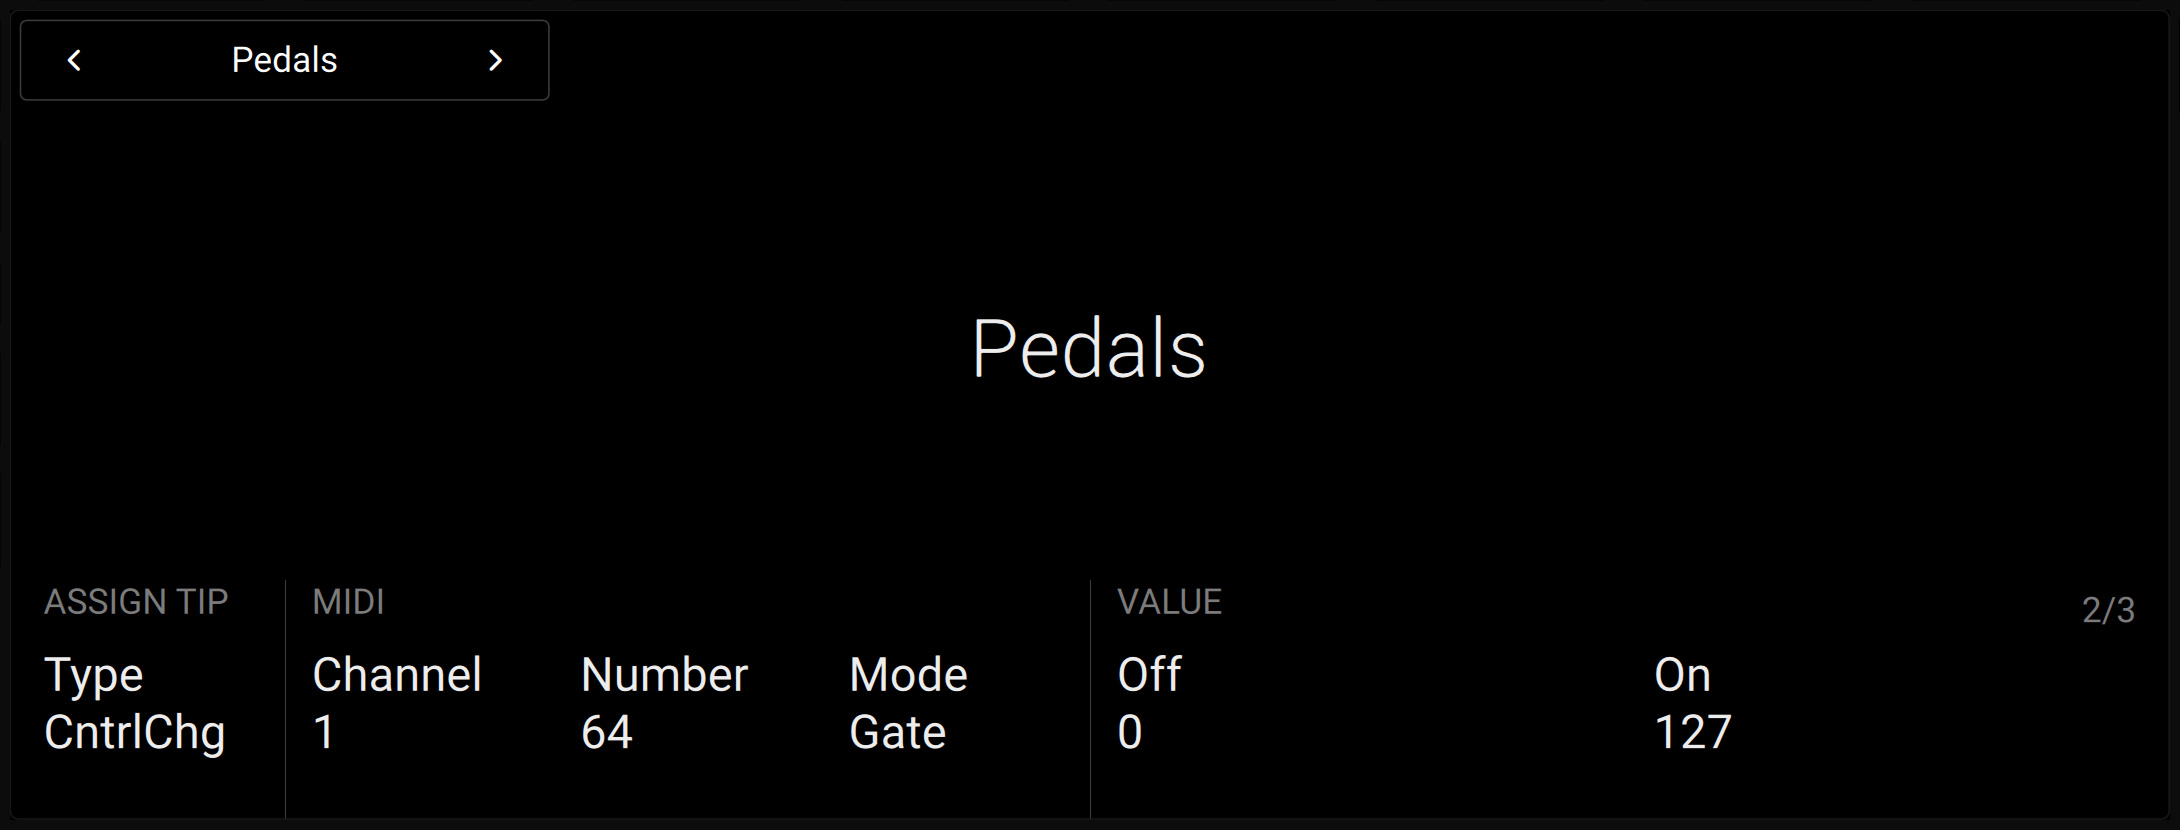 KS-MK3_D_Settings-Pedals-Switch-Page2.jpg